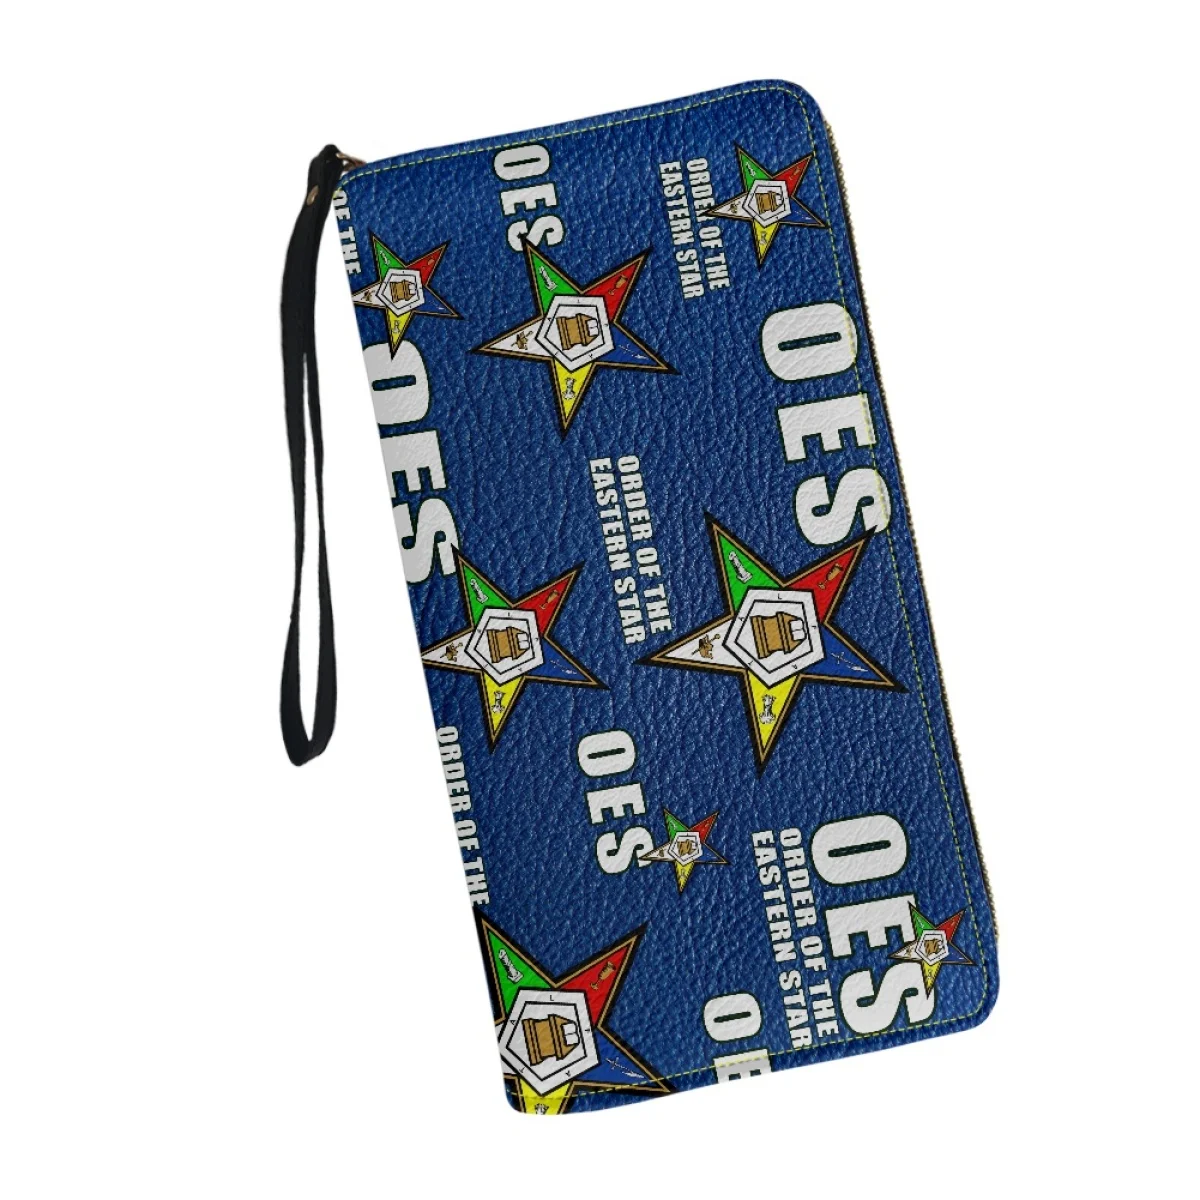 OES Sistars Order Of Eastern Long Wallets for Women Personalized Design Sorority Gifts Hand Strap Purse PU Leather Money Bags